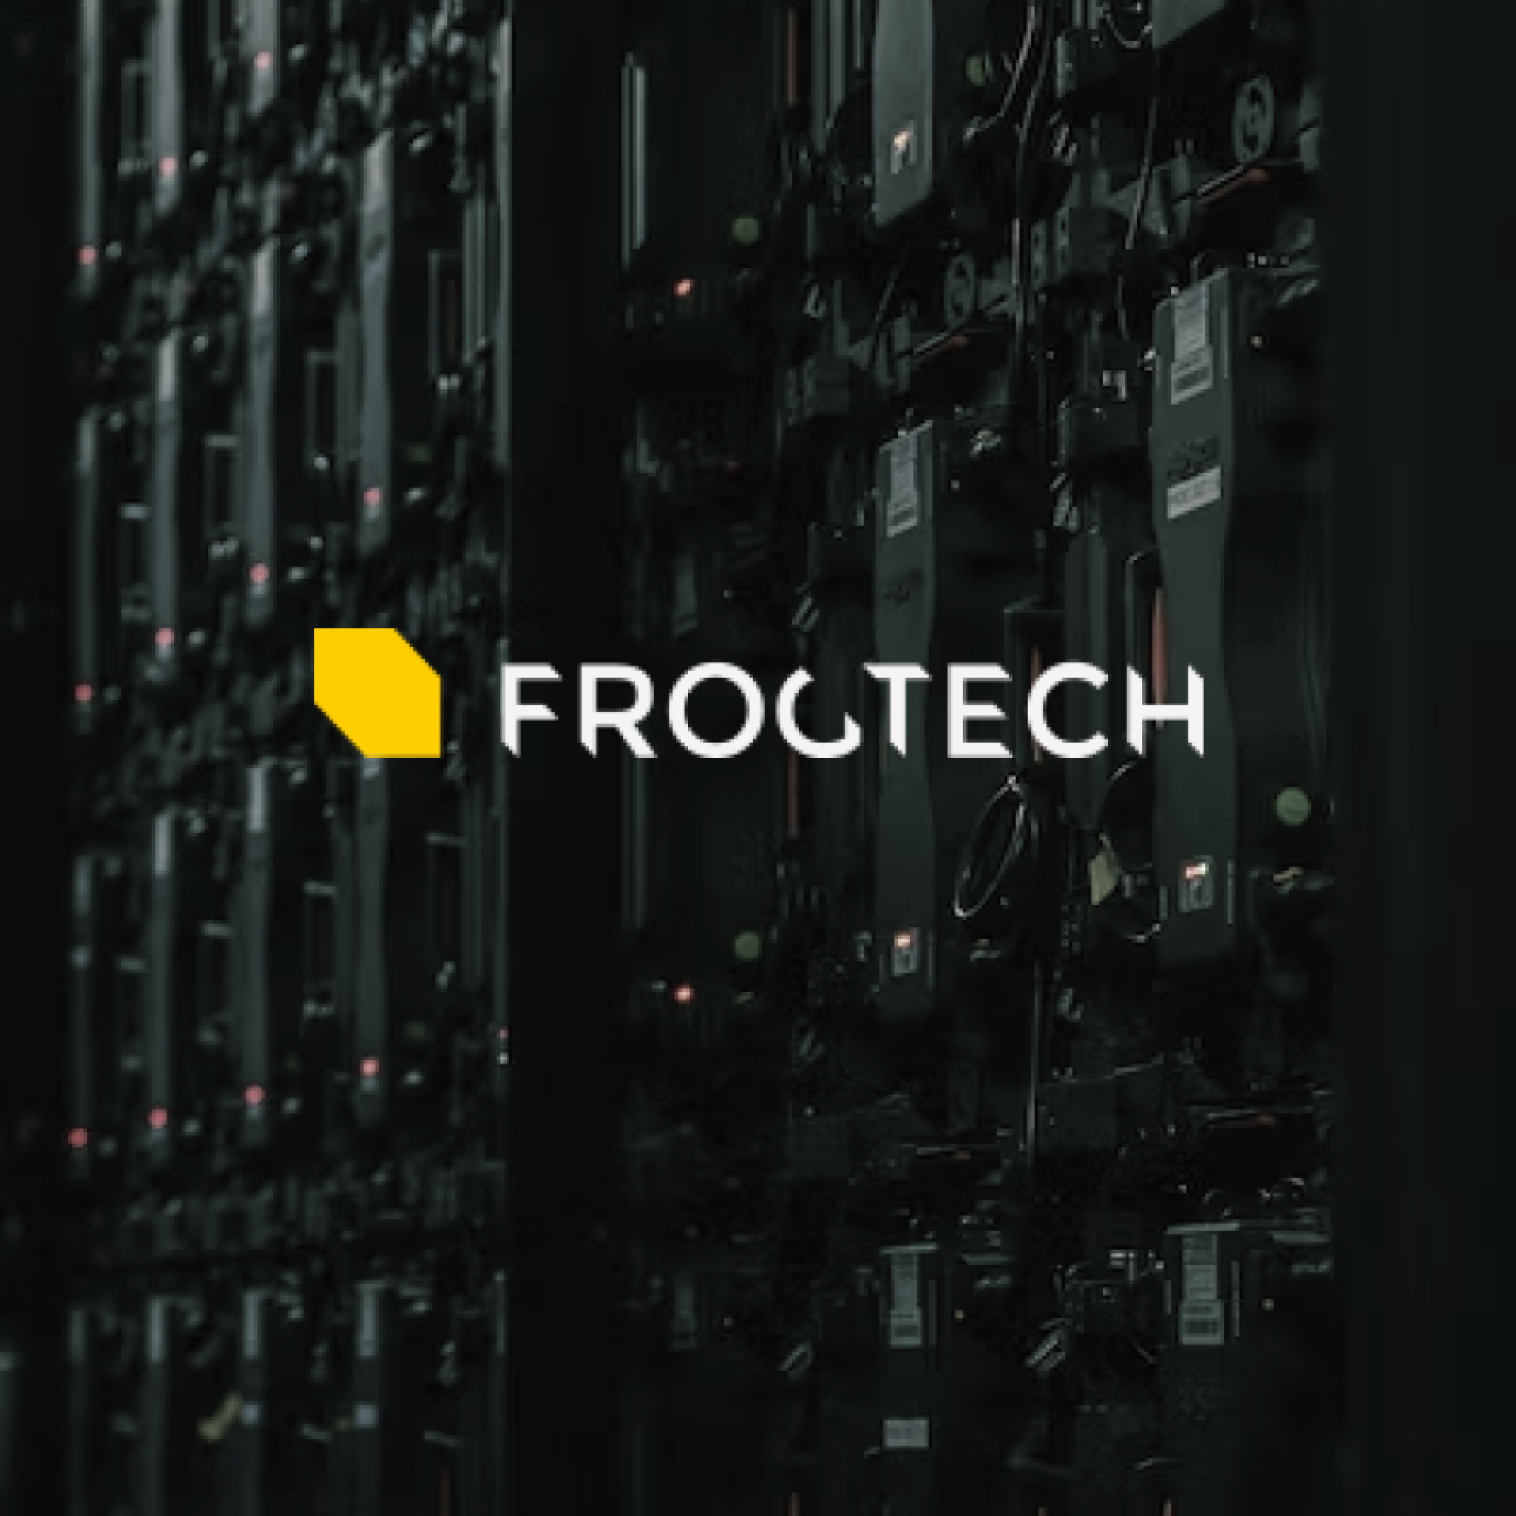 frogtech logo on the background of the photo showing the servers from an angle